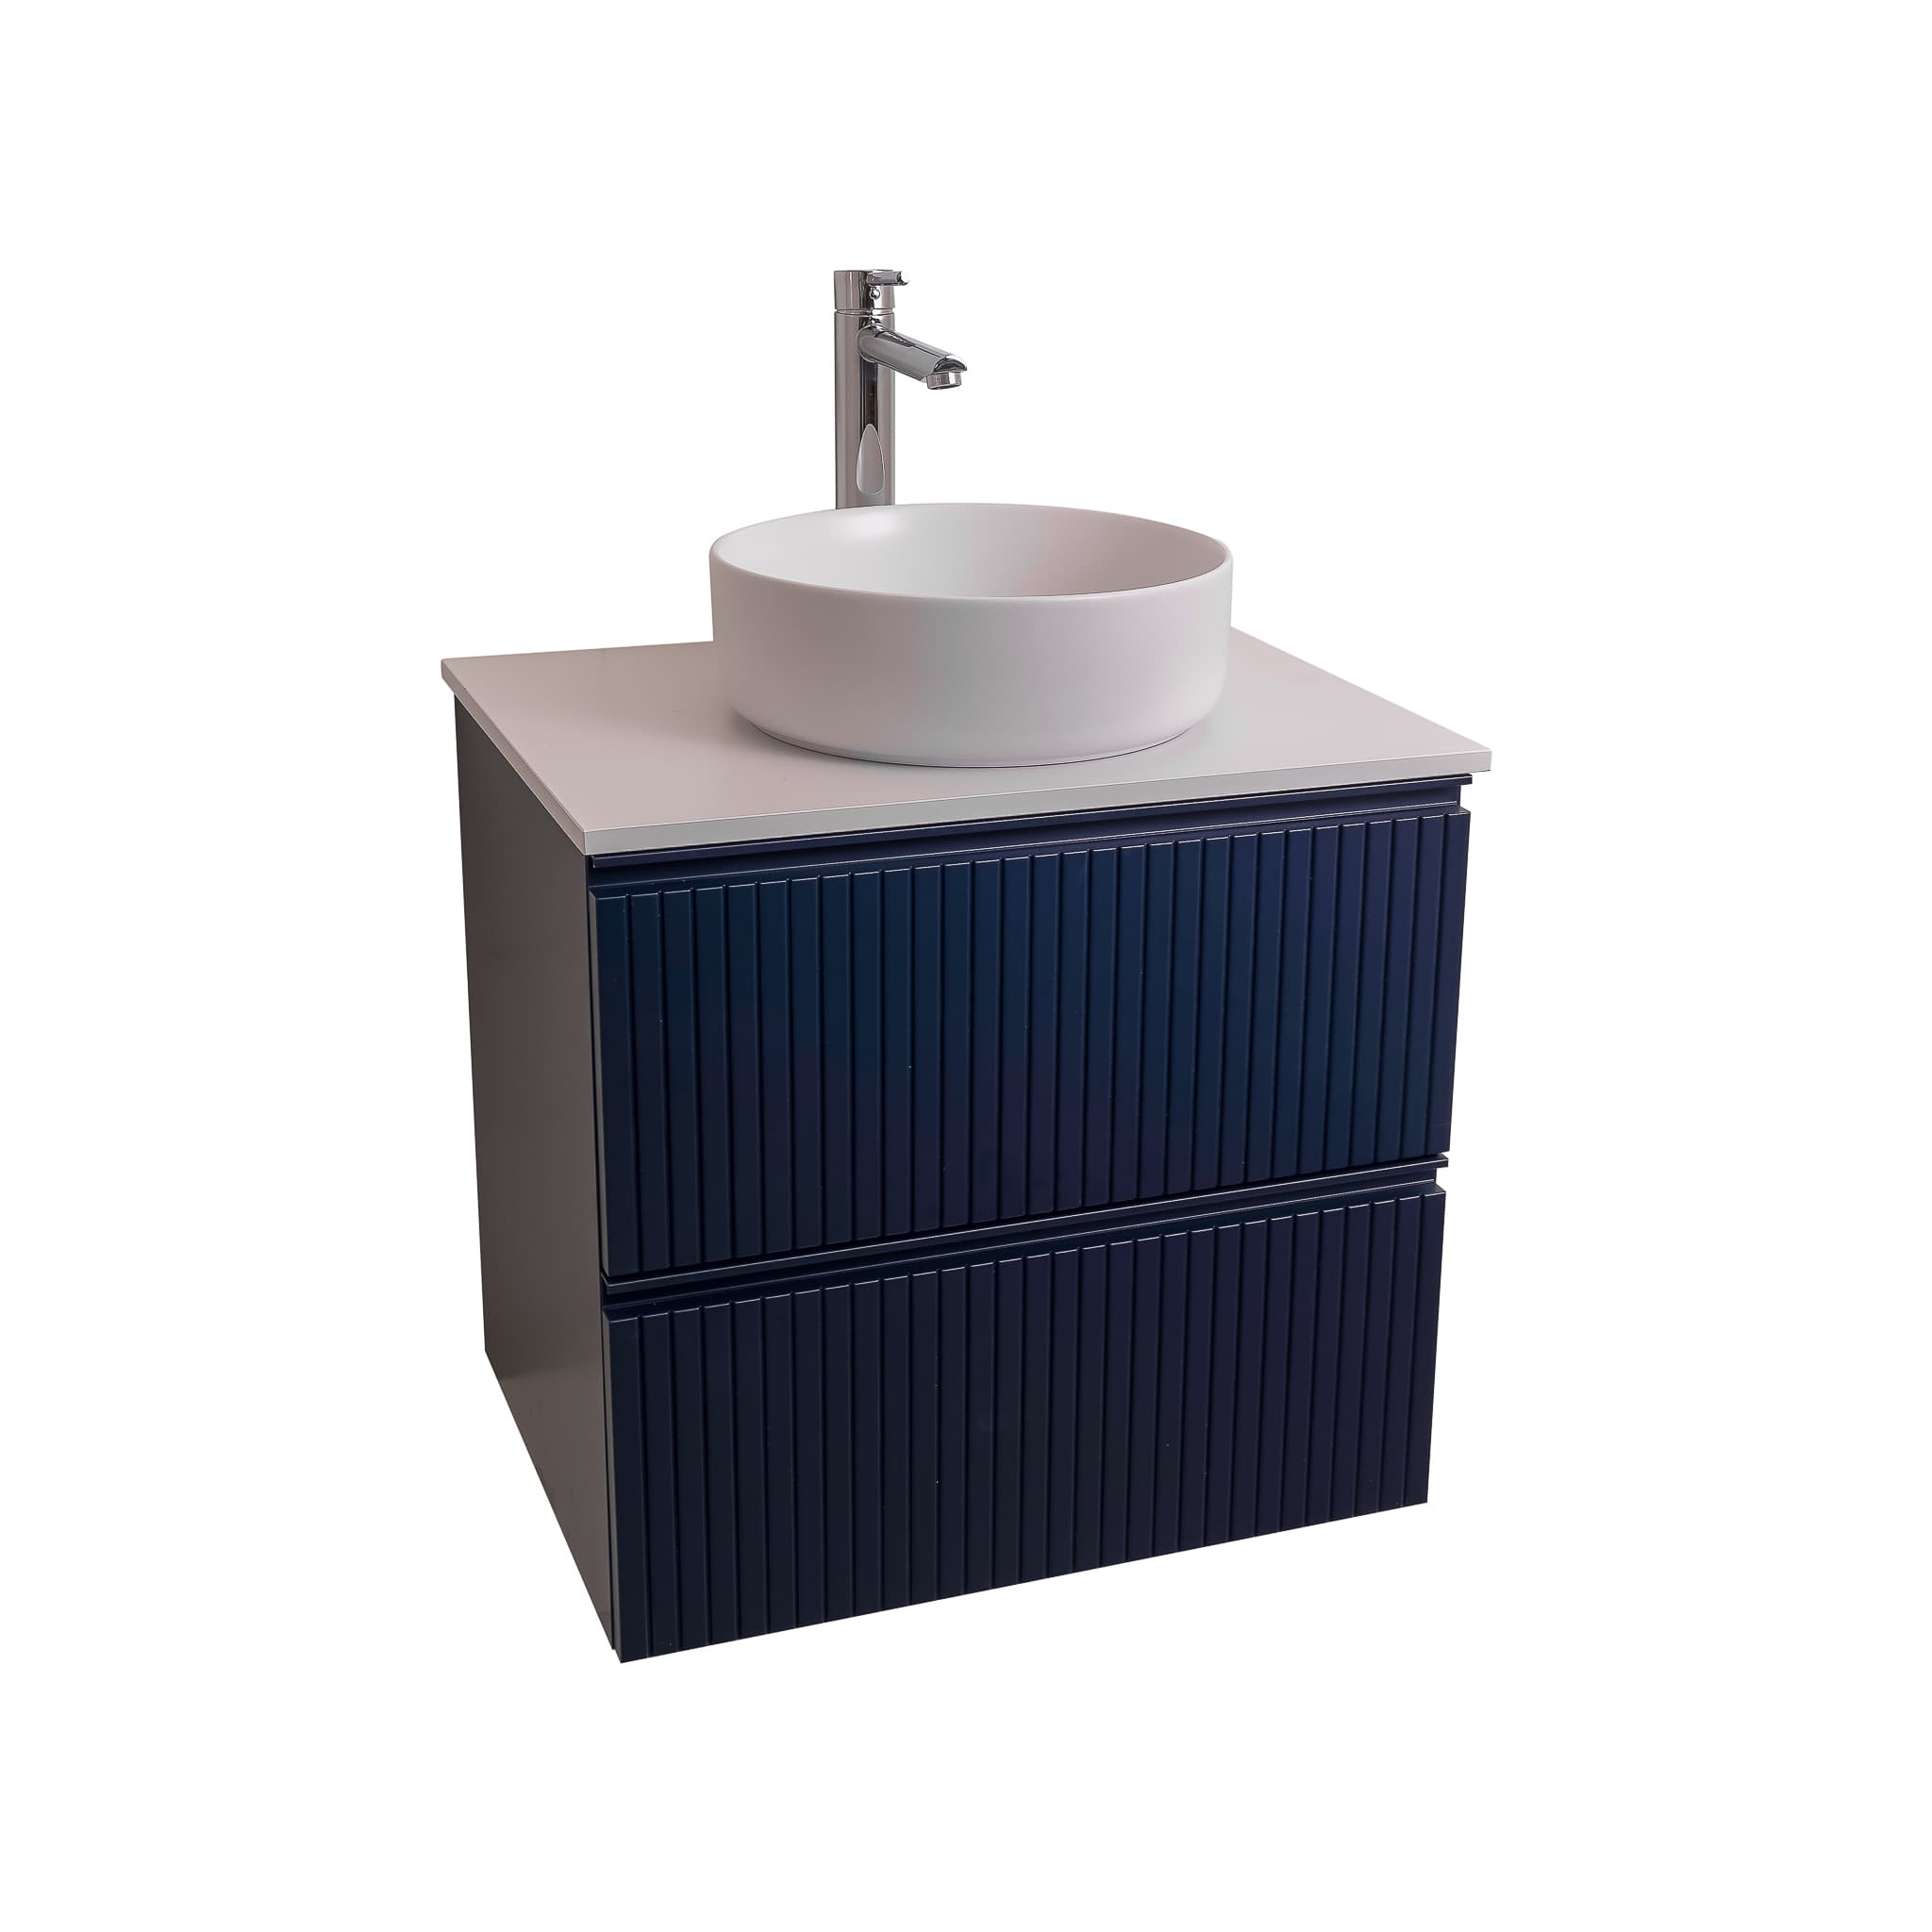 Ares 23.5 Matte Navy Blue Cabinet, Ares White Top And Ares White Ceramic Basin, Wall Mounted Modern Vanity Set